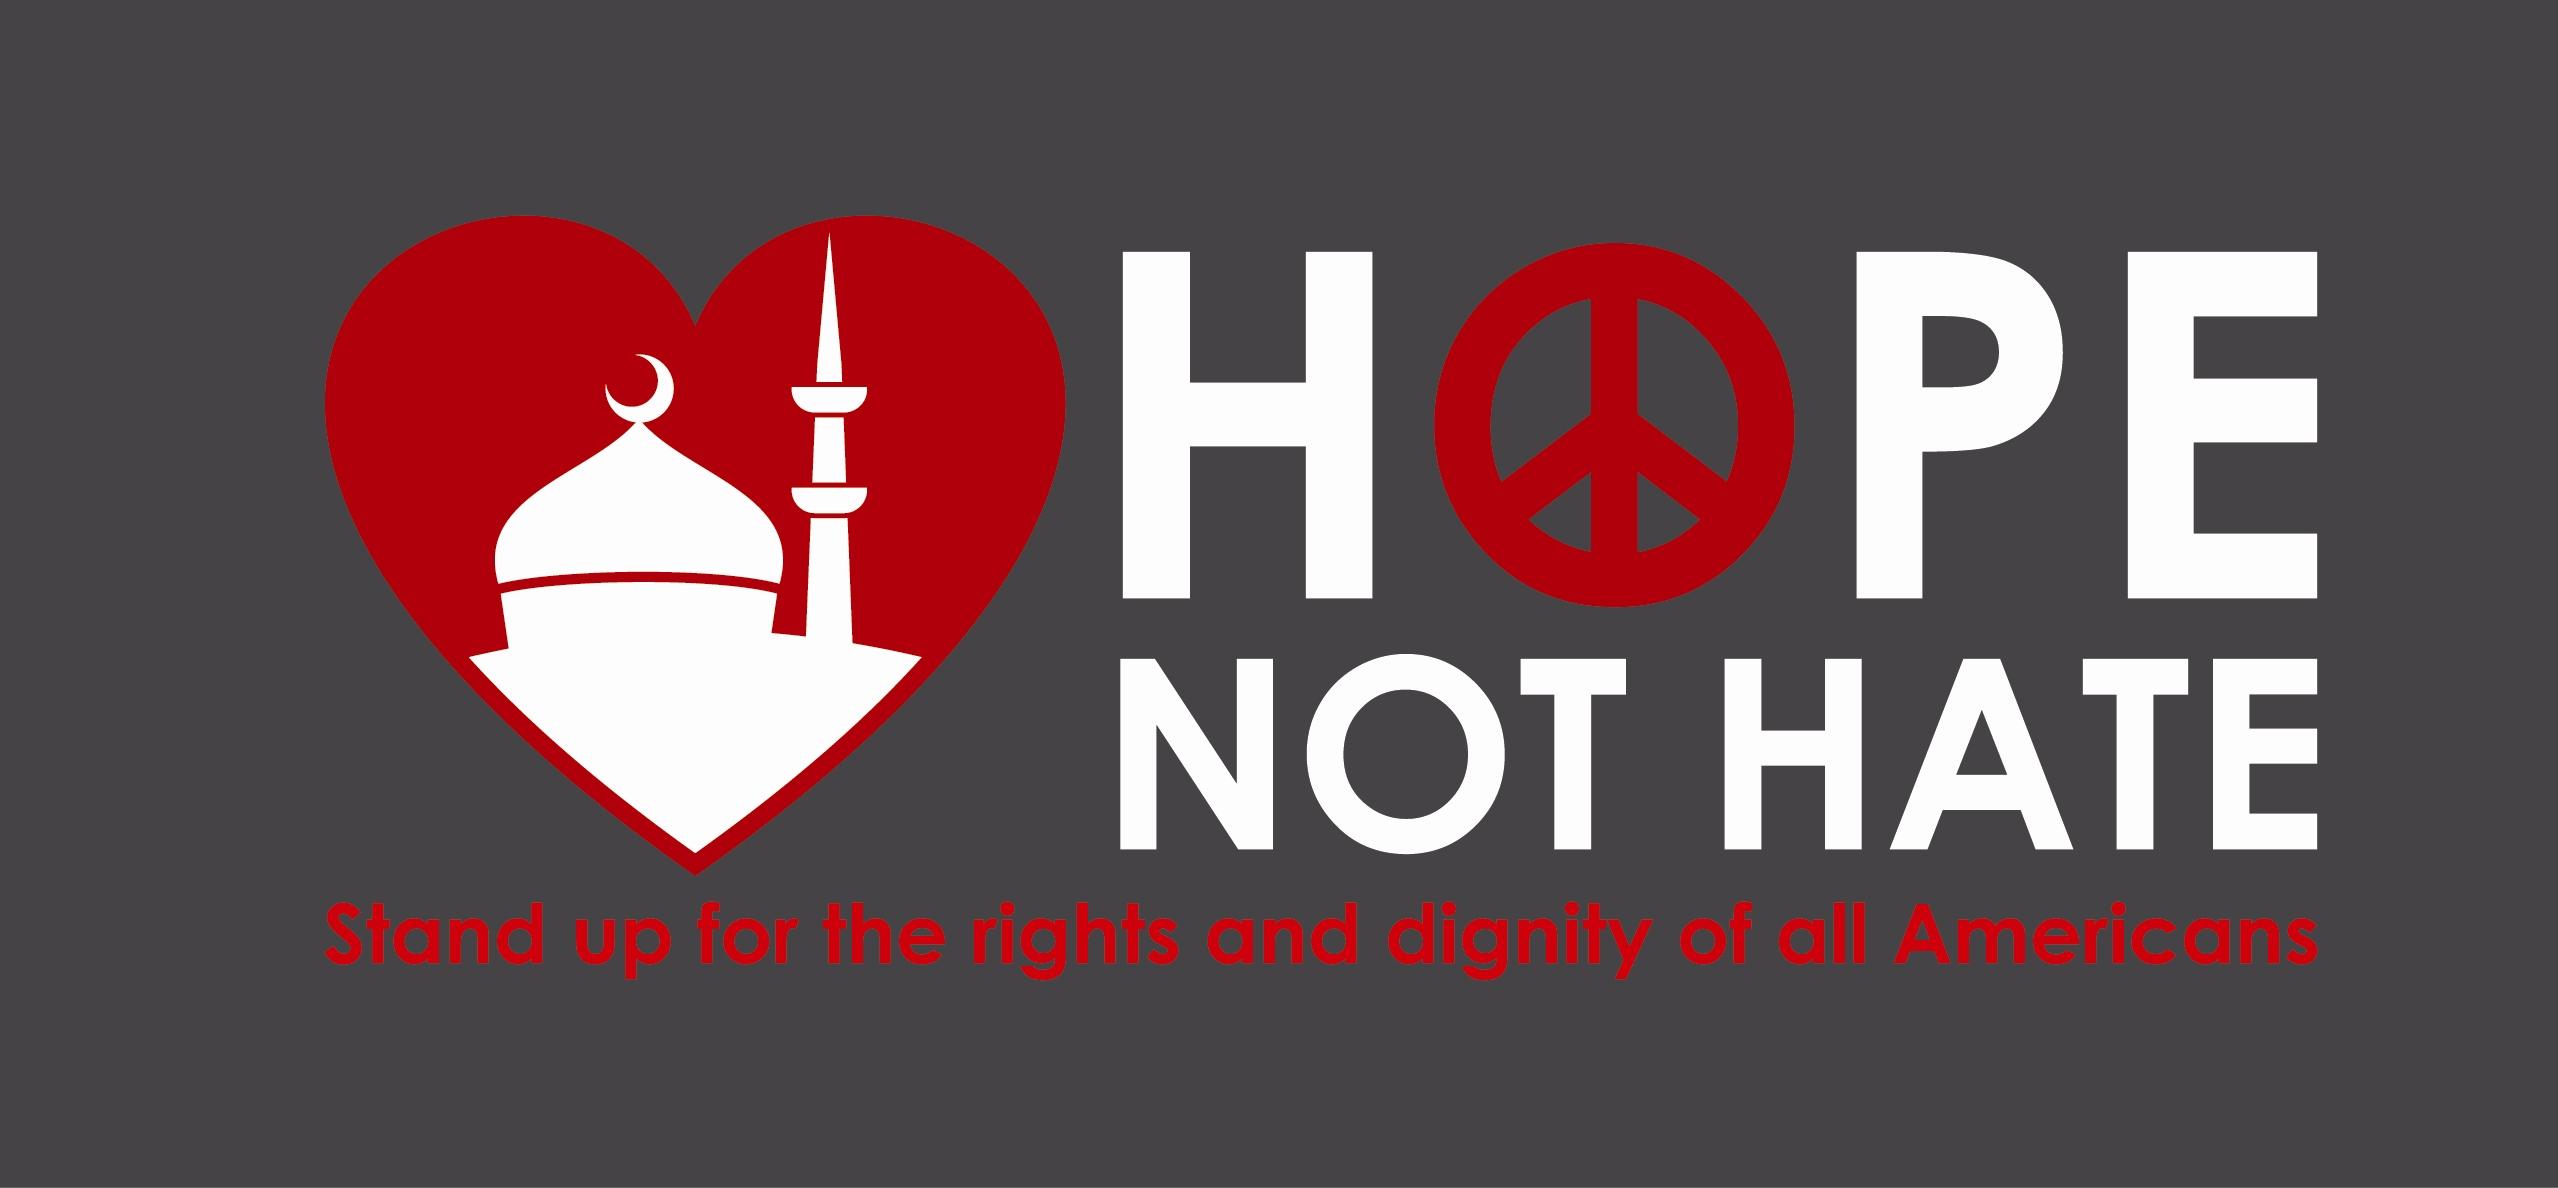 Defeat the hate and Islamophobia: GET INVOLVED NOW!